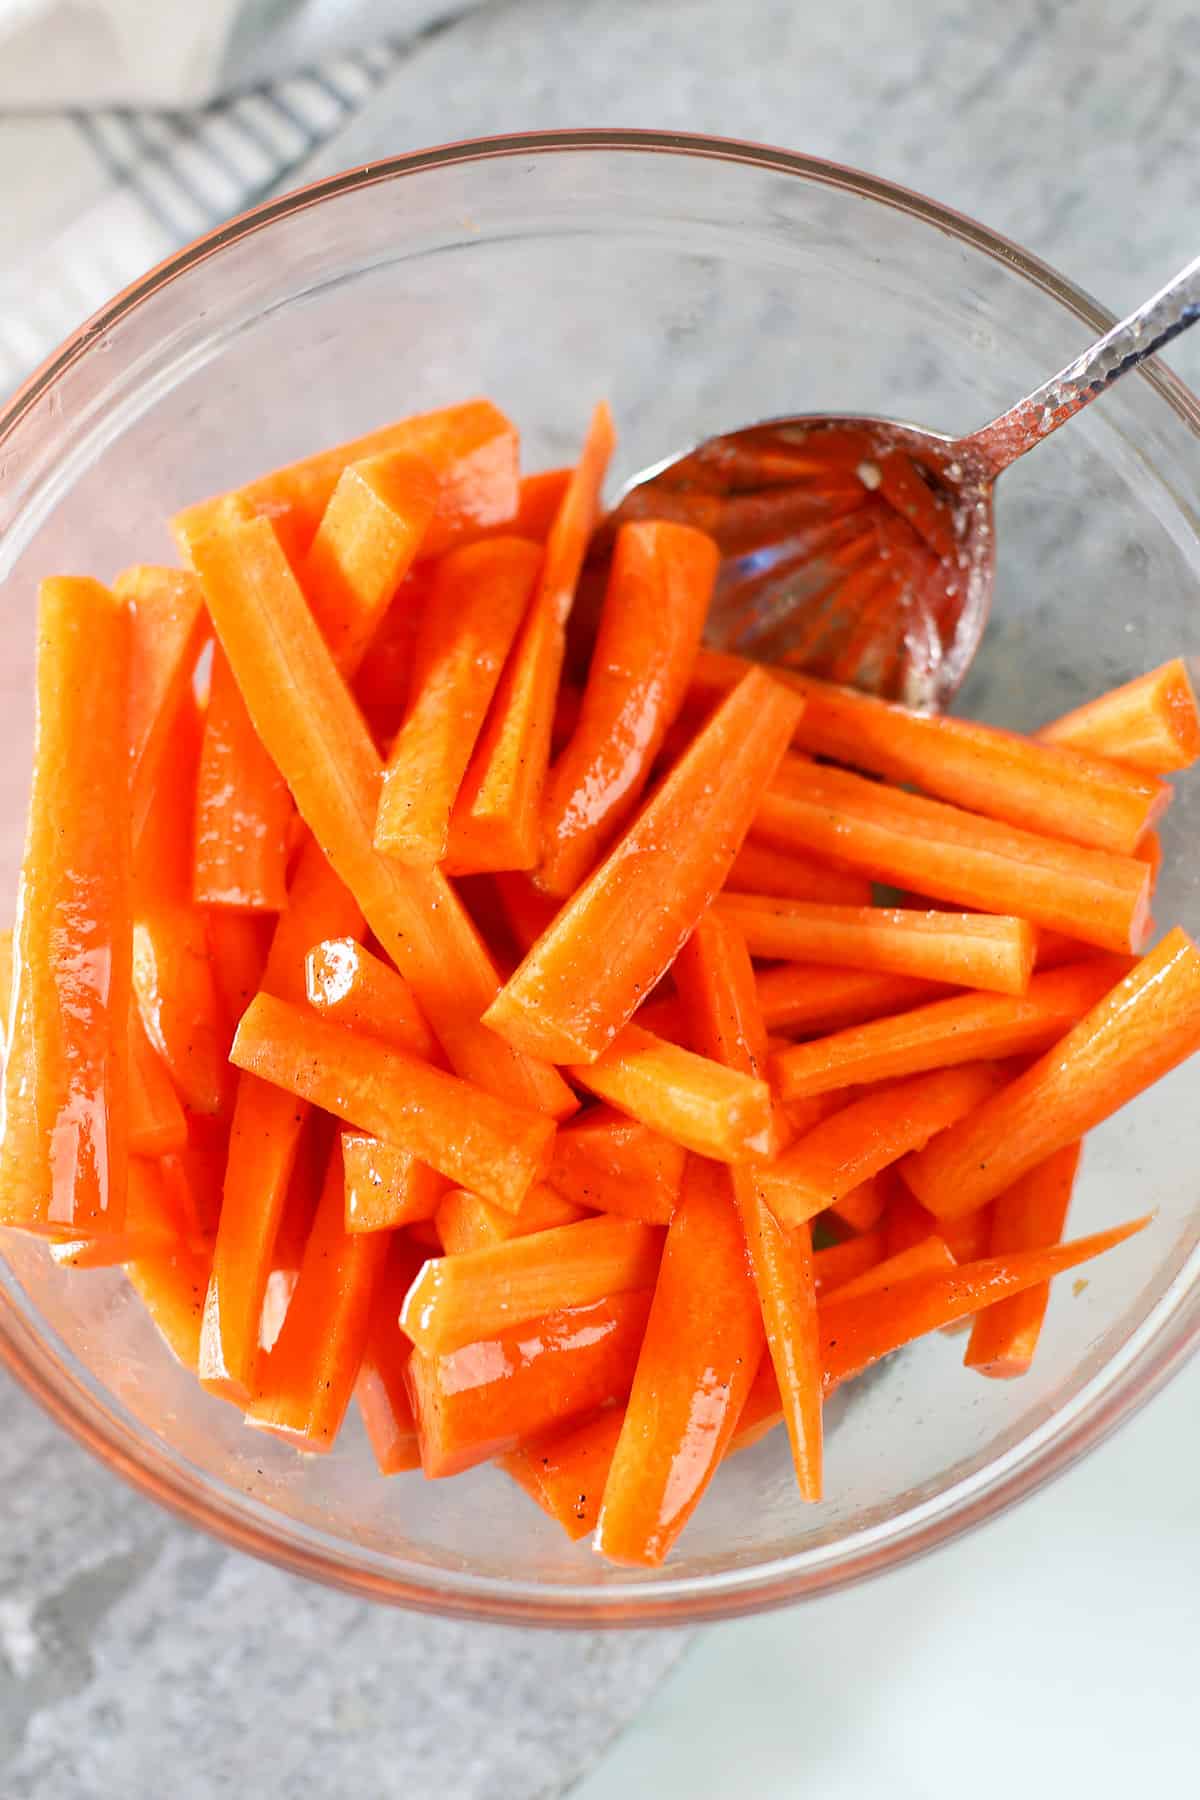 Tossing sliced carrots in maple syrup and butter.